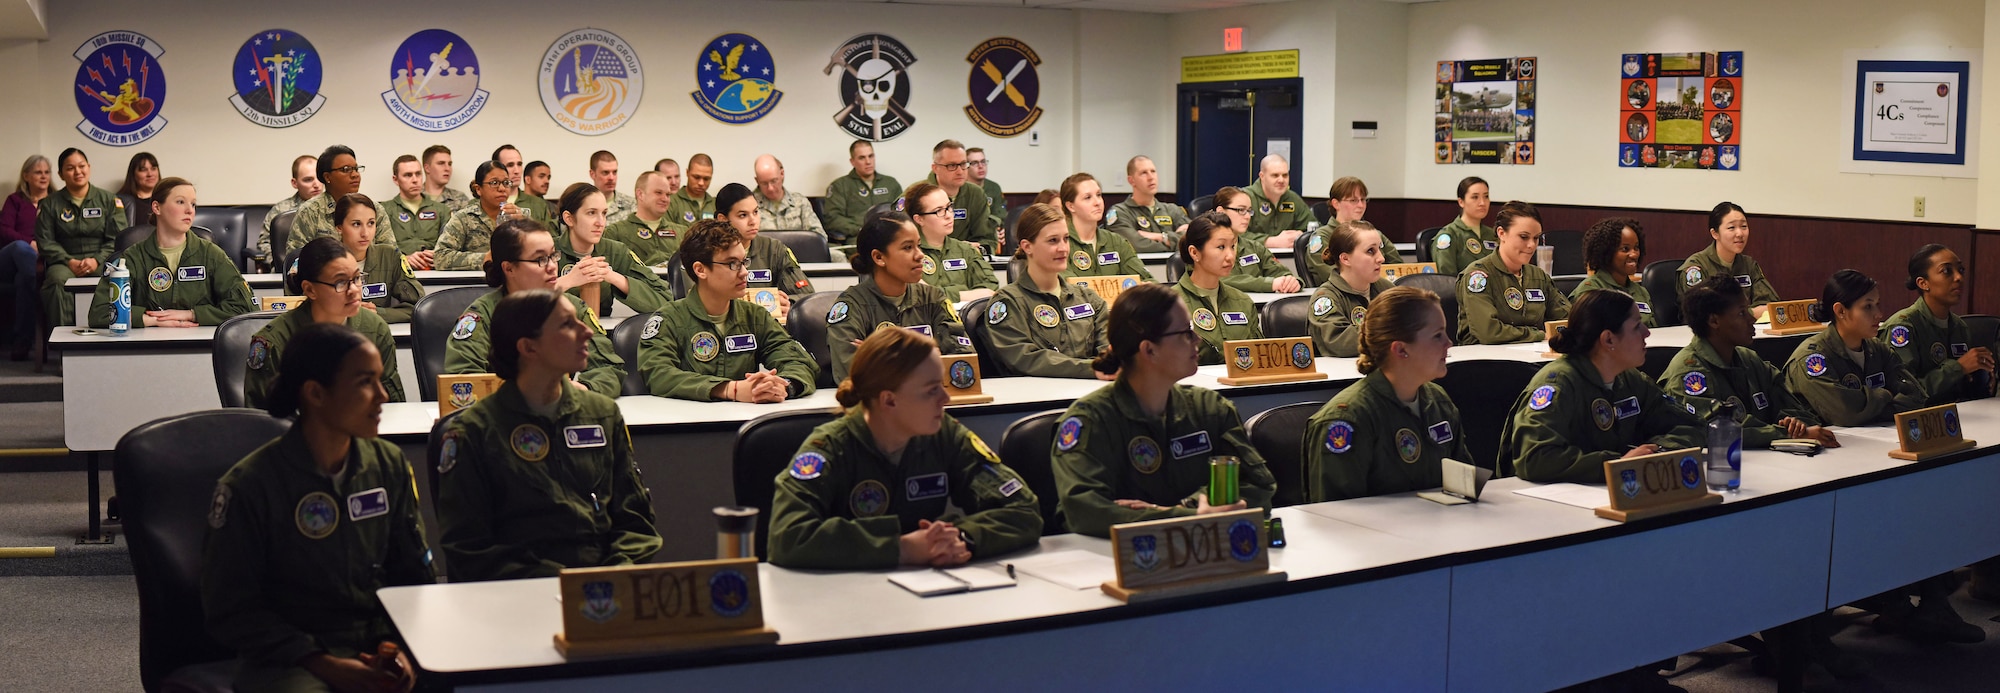 All women missileer crews from Malmstrom Air Force Base, Mont., gather for a pre departure briefing before heading in the 13,800 square mile missile complex to complete their 24-hour alert March 22, 2016. On March 22, all of the nation’s alert intercontinental ballistic missile missileers and B-52 Stratofortress crews within the United States were crewed by women as part of Air Force Global Strike Command’s recognition of Women’s History Month. (U.S. Air Force photo/Airman Collin Schmidt)